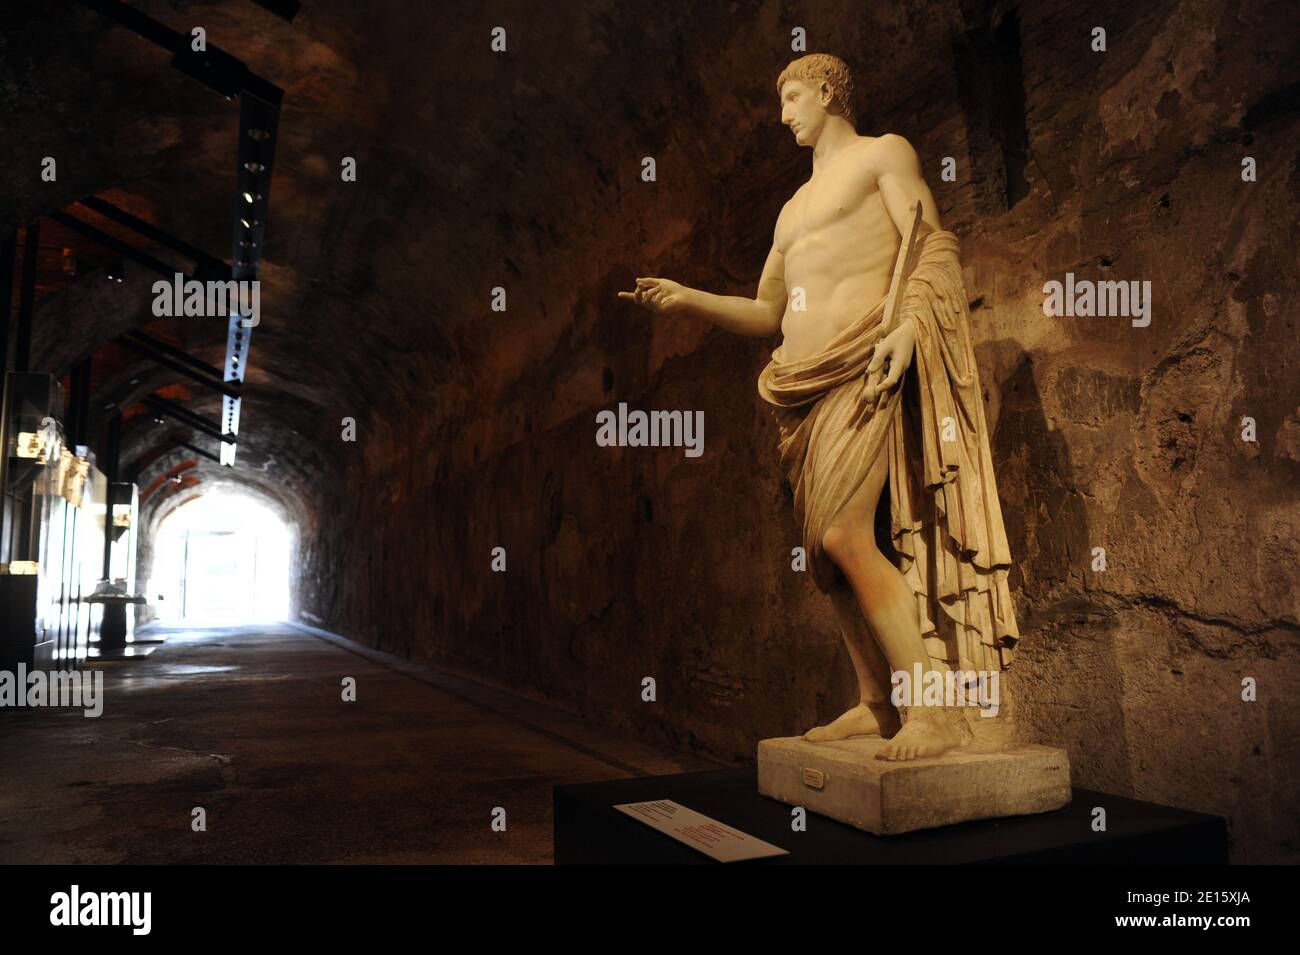 A marble statue of a youth in heroic pose, so-called Britannicus is pictured in the Neronian Cryptoporticus in Rome, Italy on april 12,2011.The exhibit 'Nerone', examining the life and dark legends of Emperor Nero (37-68 AD), opens in Rome across five different landmarks of the ancient imperial capital. Nero has been infamous throughout history for tyranny, extravagance, cold-blooded murder, and cruel persecution of Christians. Ancient Roman historians accused him of killing his mother, stepbrother and two wives, and of burning Christians at night in his garden for firelight. He was known as t Stock Photo